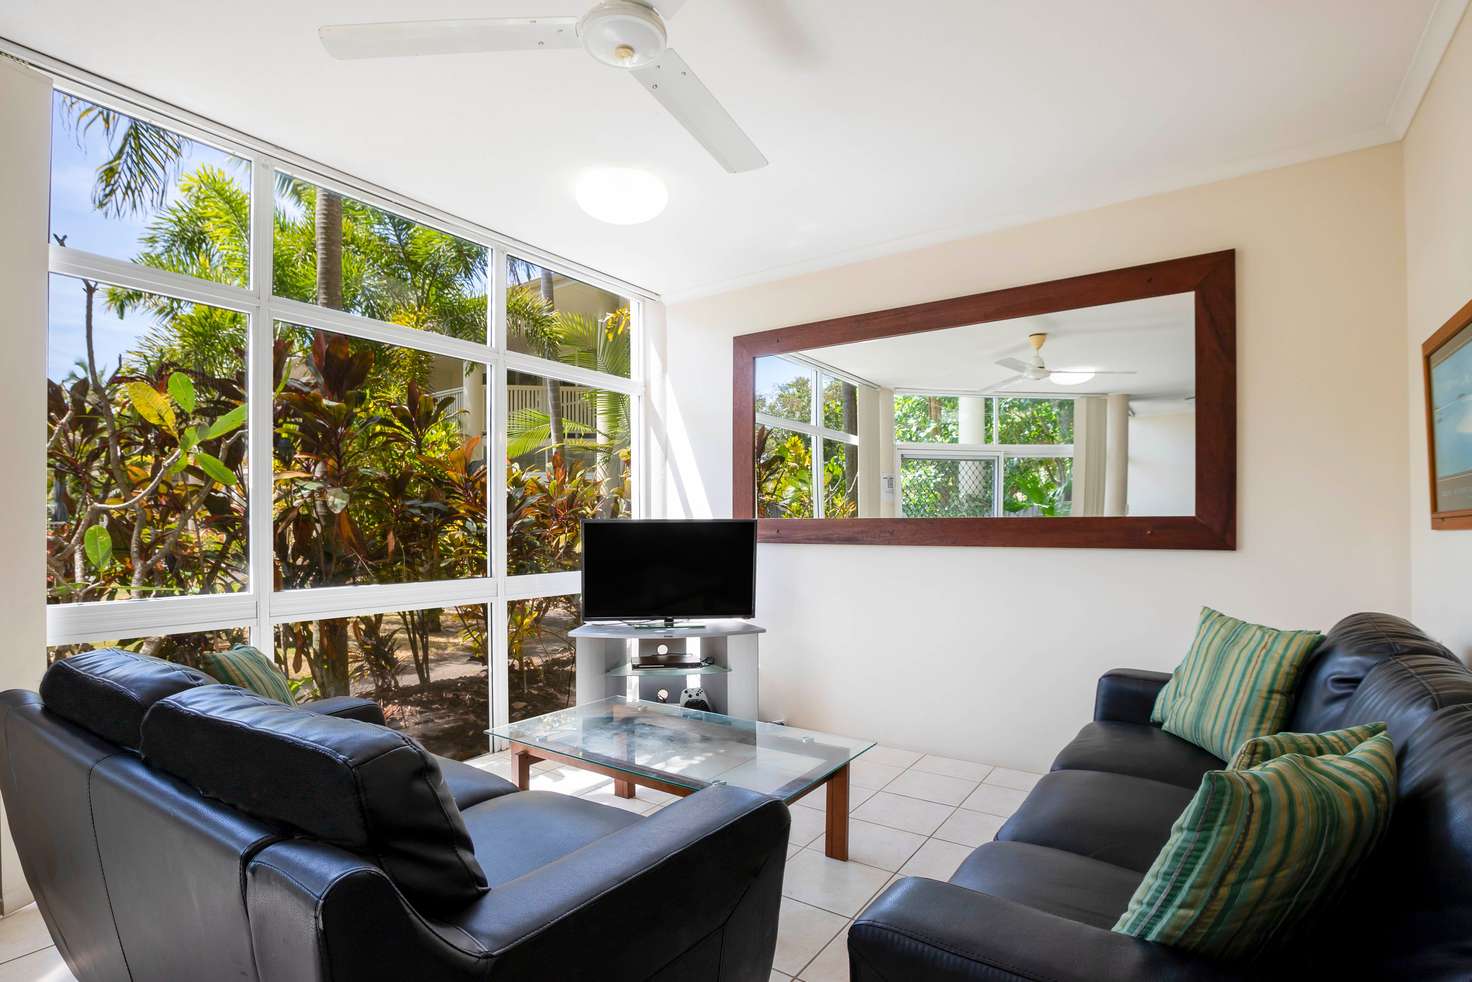 Main view of Homely apartment listing, 14/119 Davidson Street, Port Douglas QLD 4877